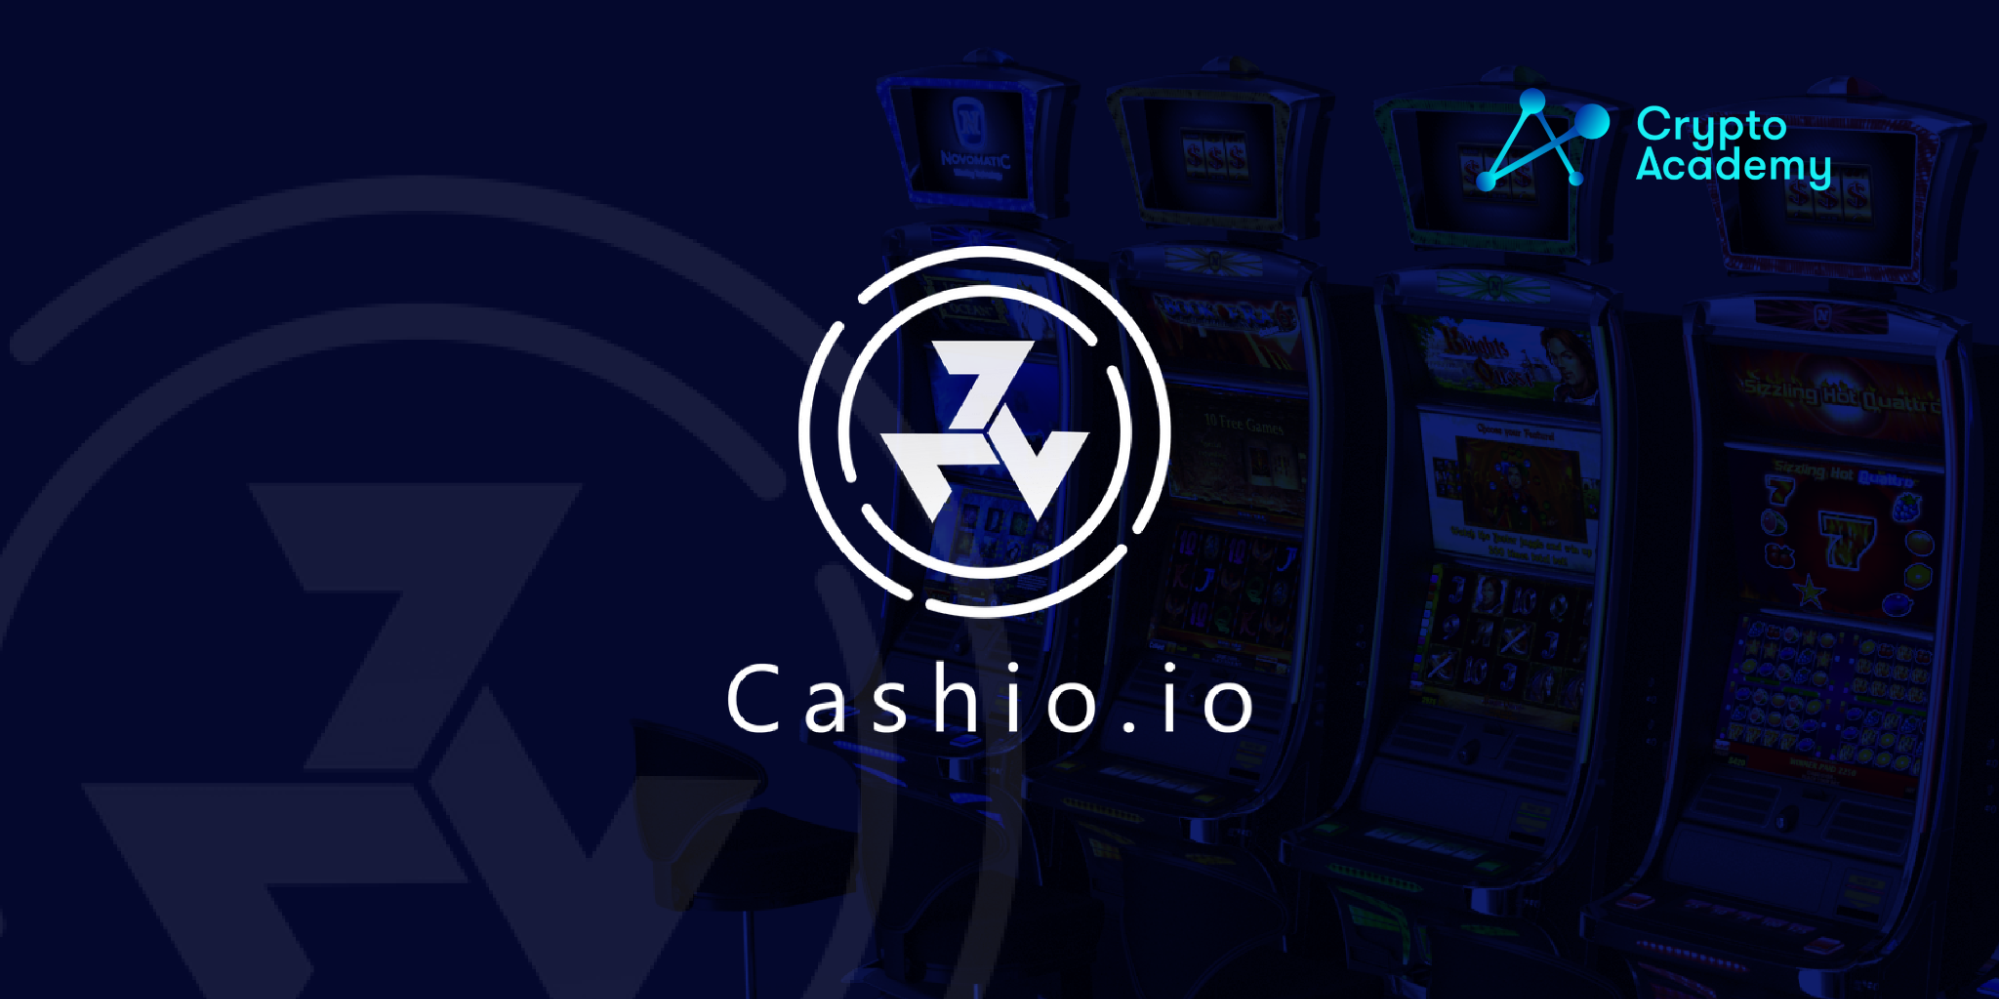 Cashio – The Revolutionary Coin and Casino in the Crypto Industry